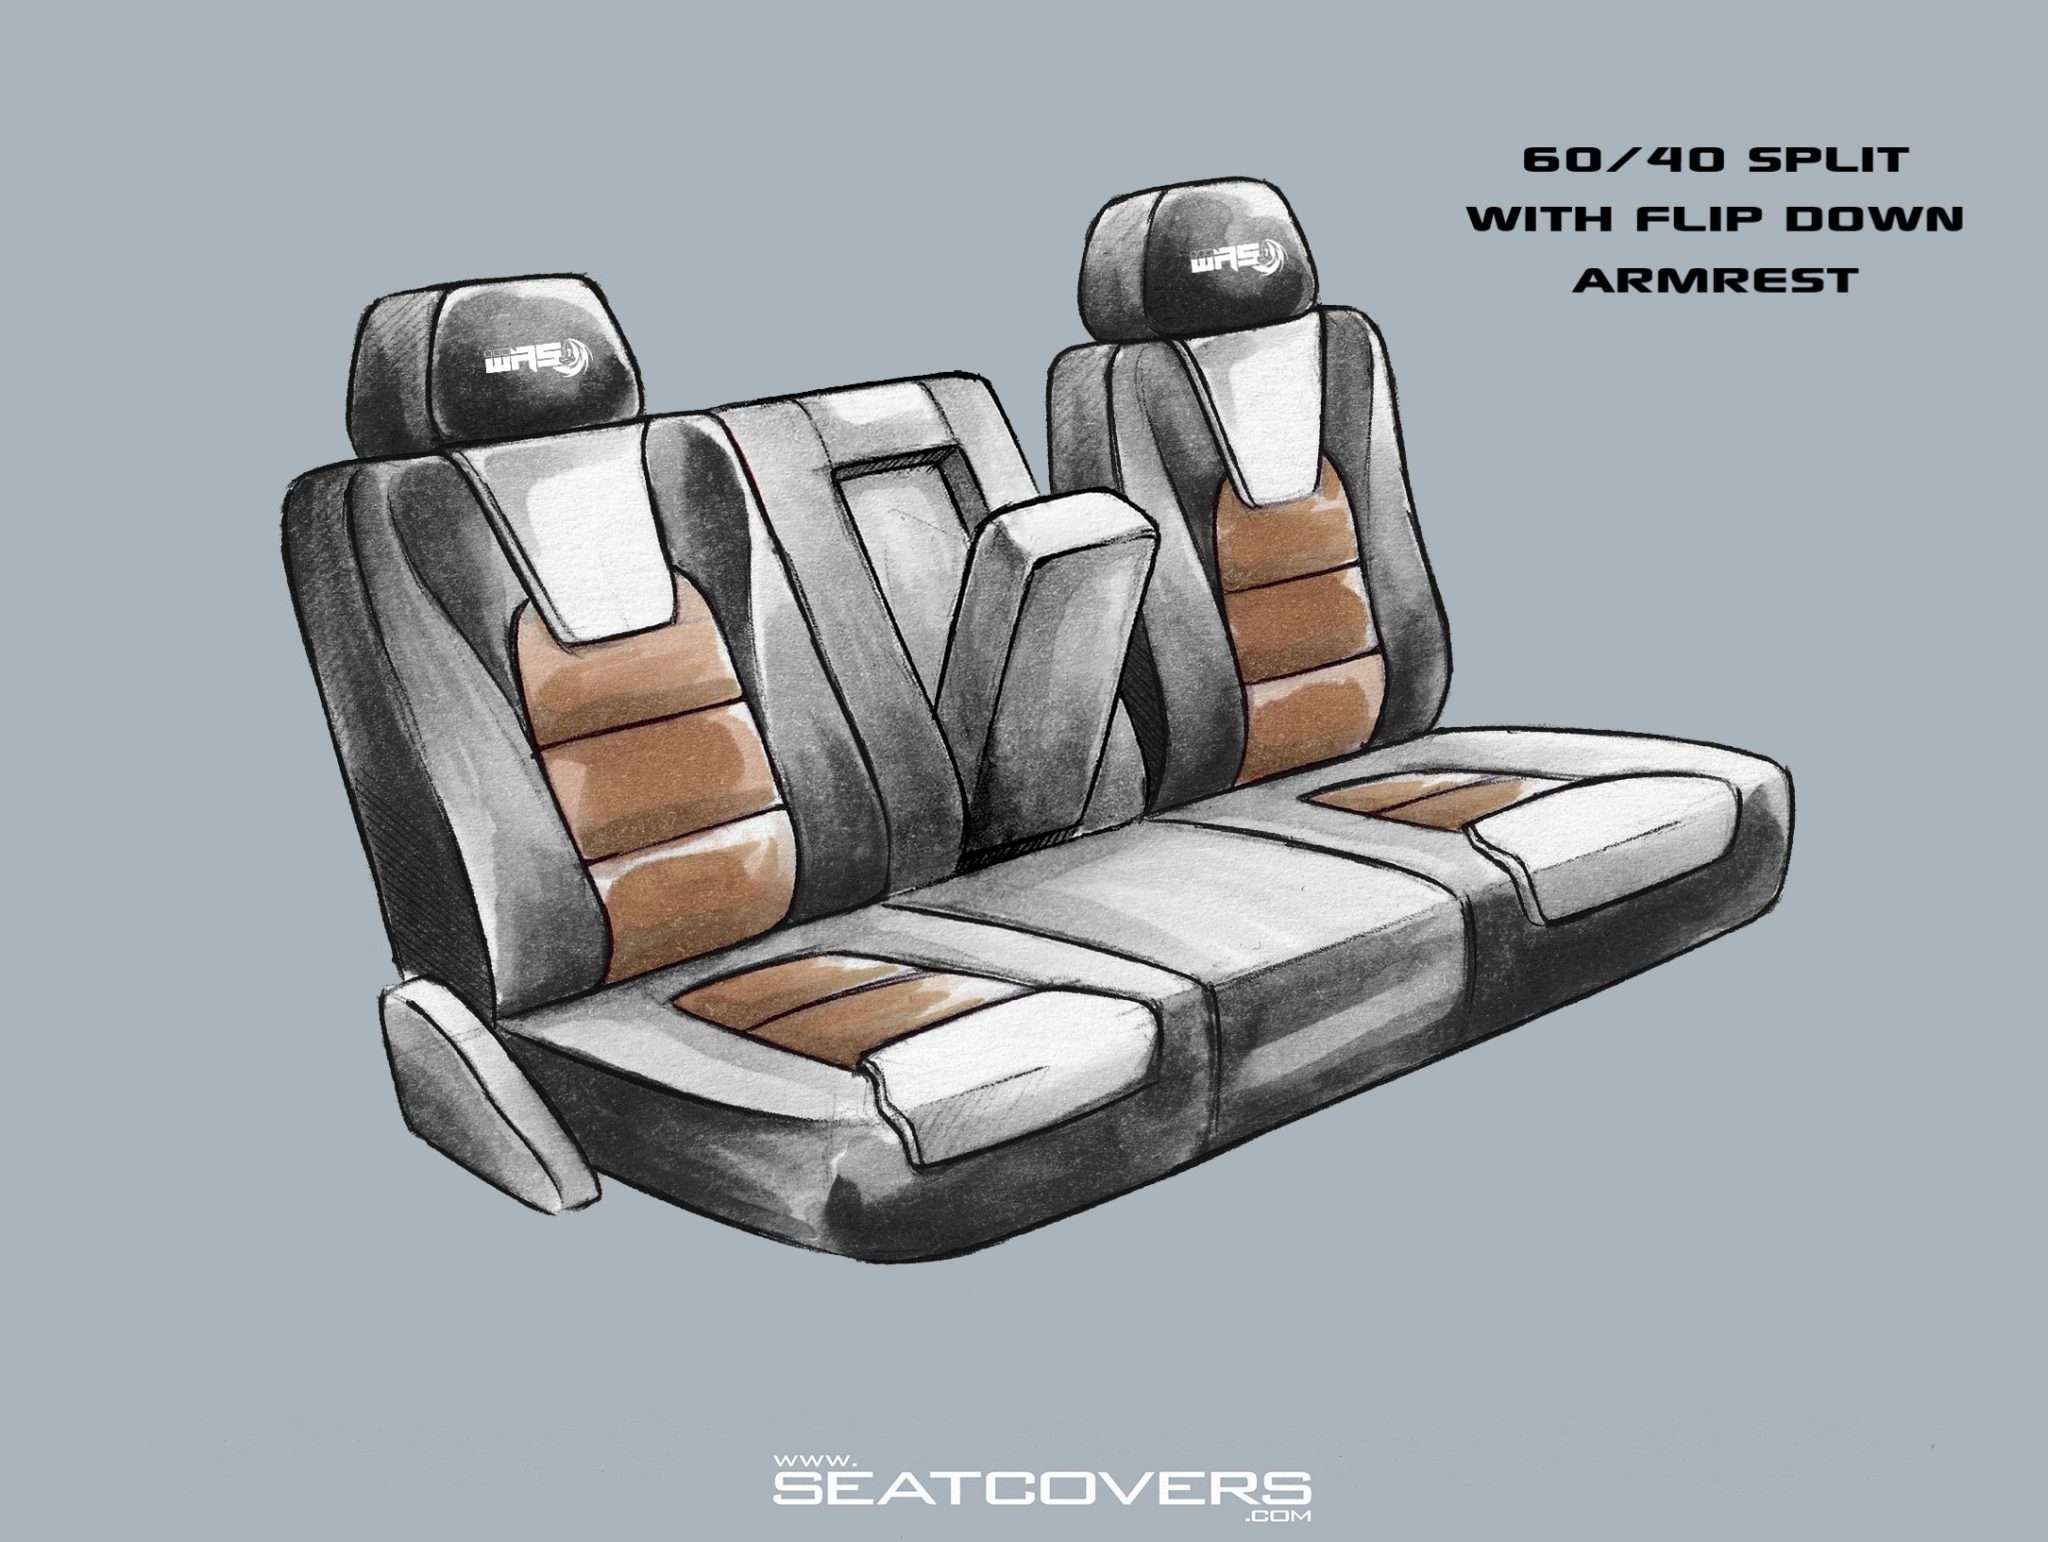 Home / Toyota / 2014+ Toyota Tundra – Rear 60/40 Seat Covers